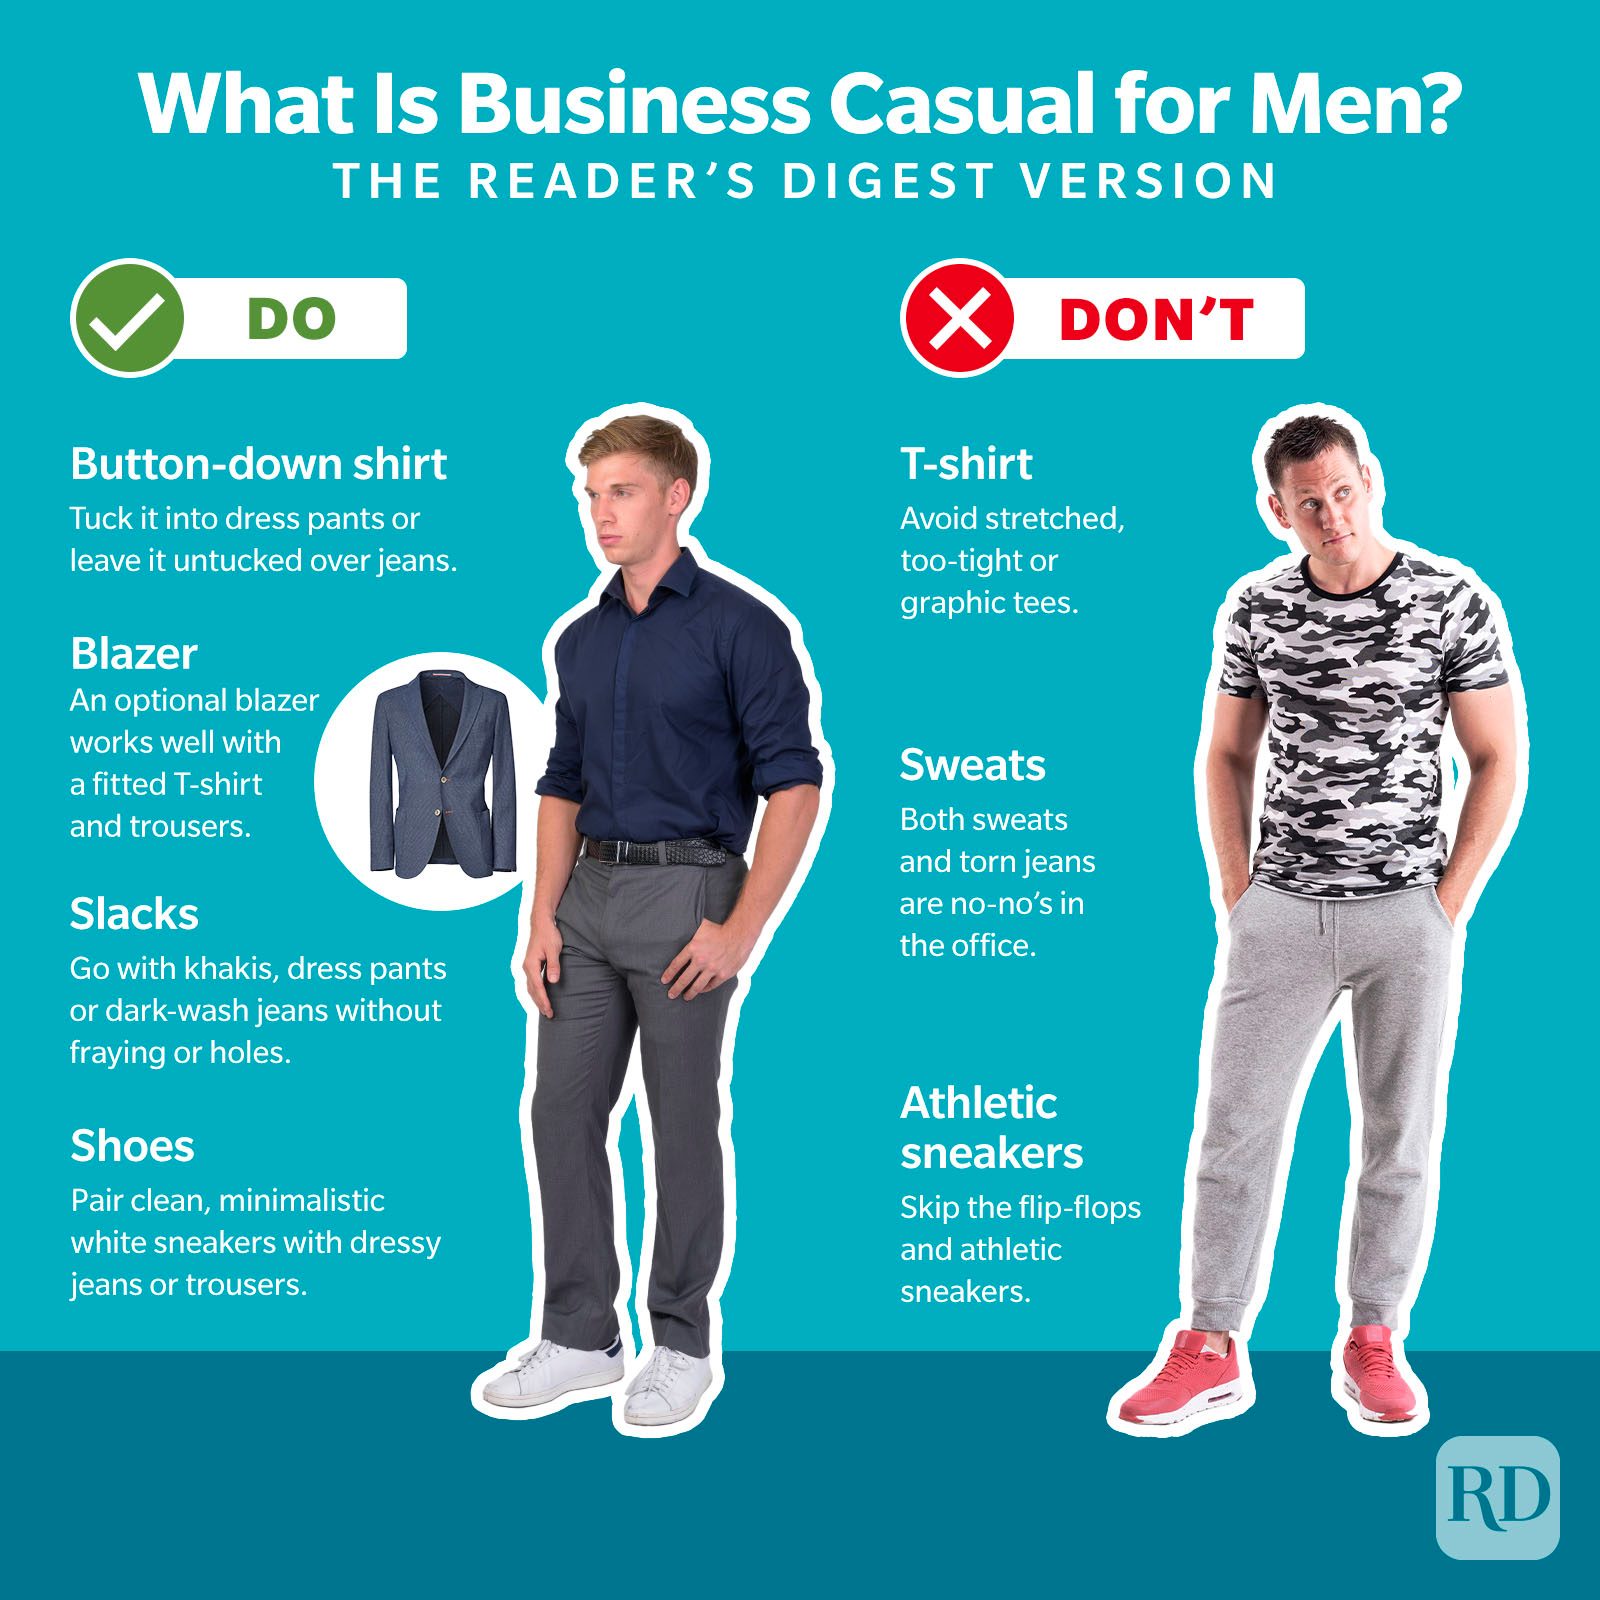 What Is Business Casual? Fashion Experts Explain How to Dress for